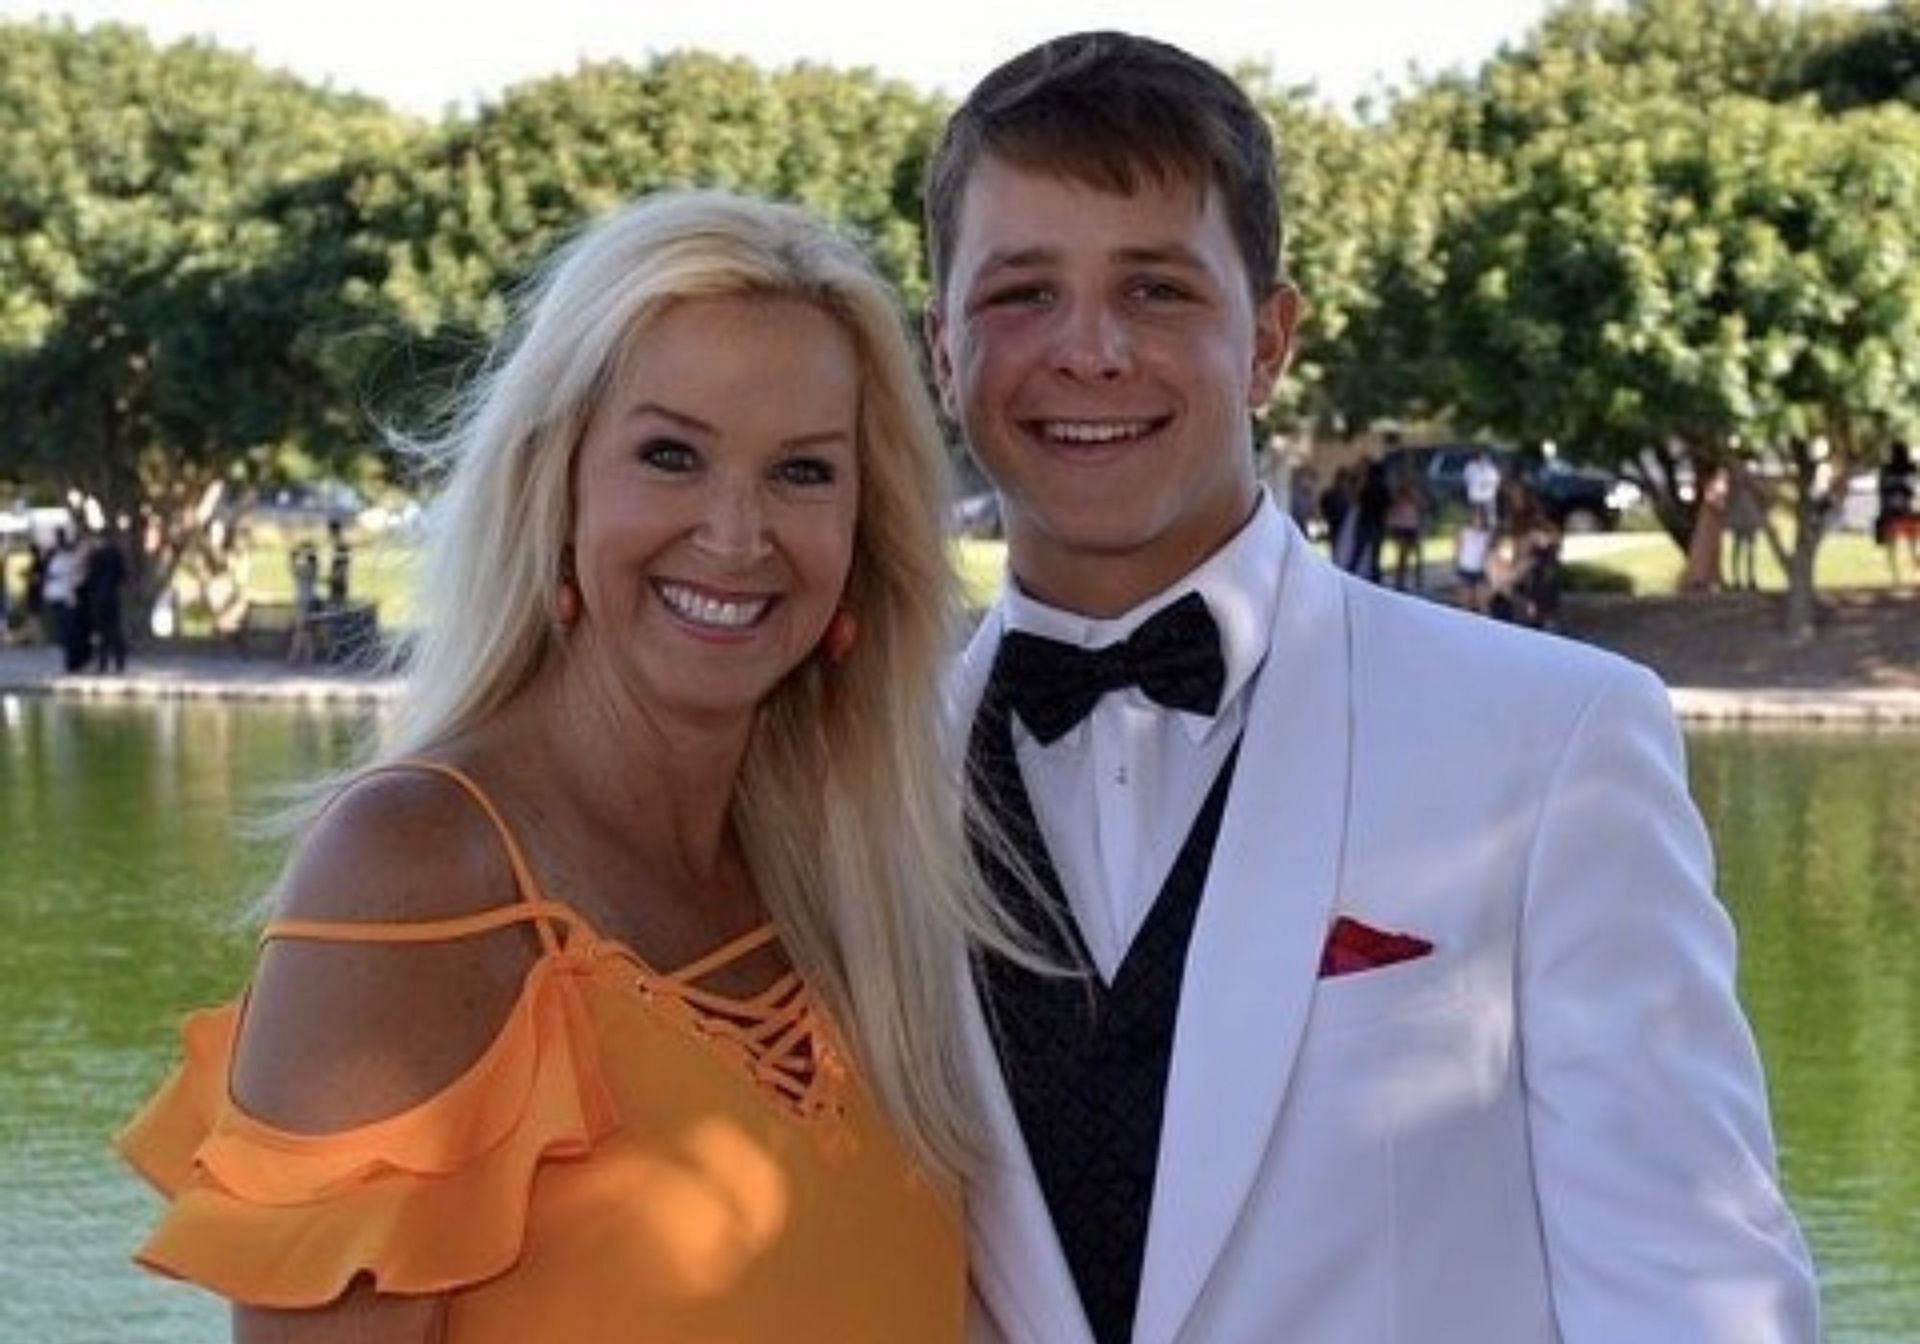 Brock Purdy with his mother Carrie Purdy